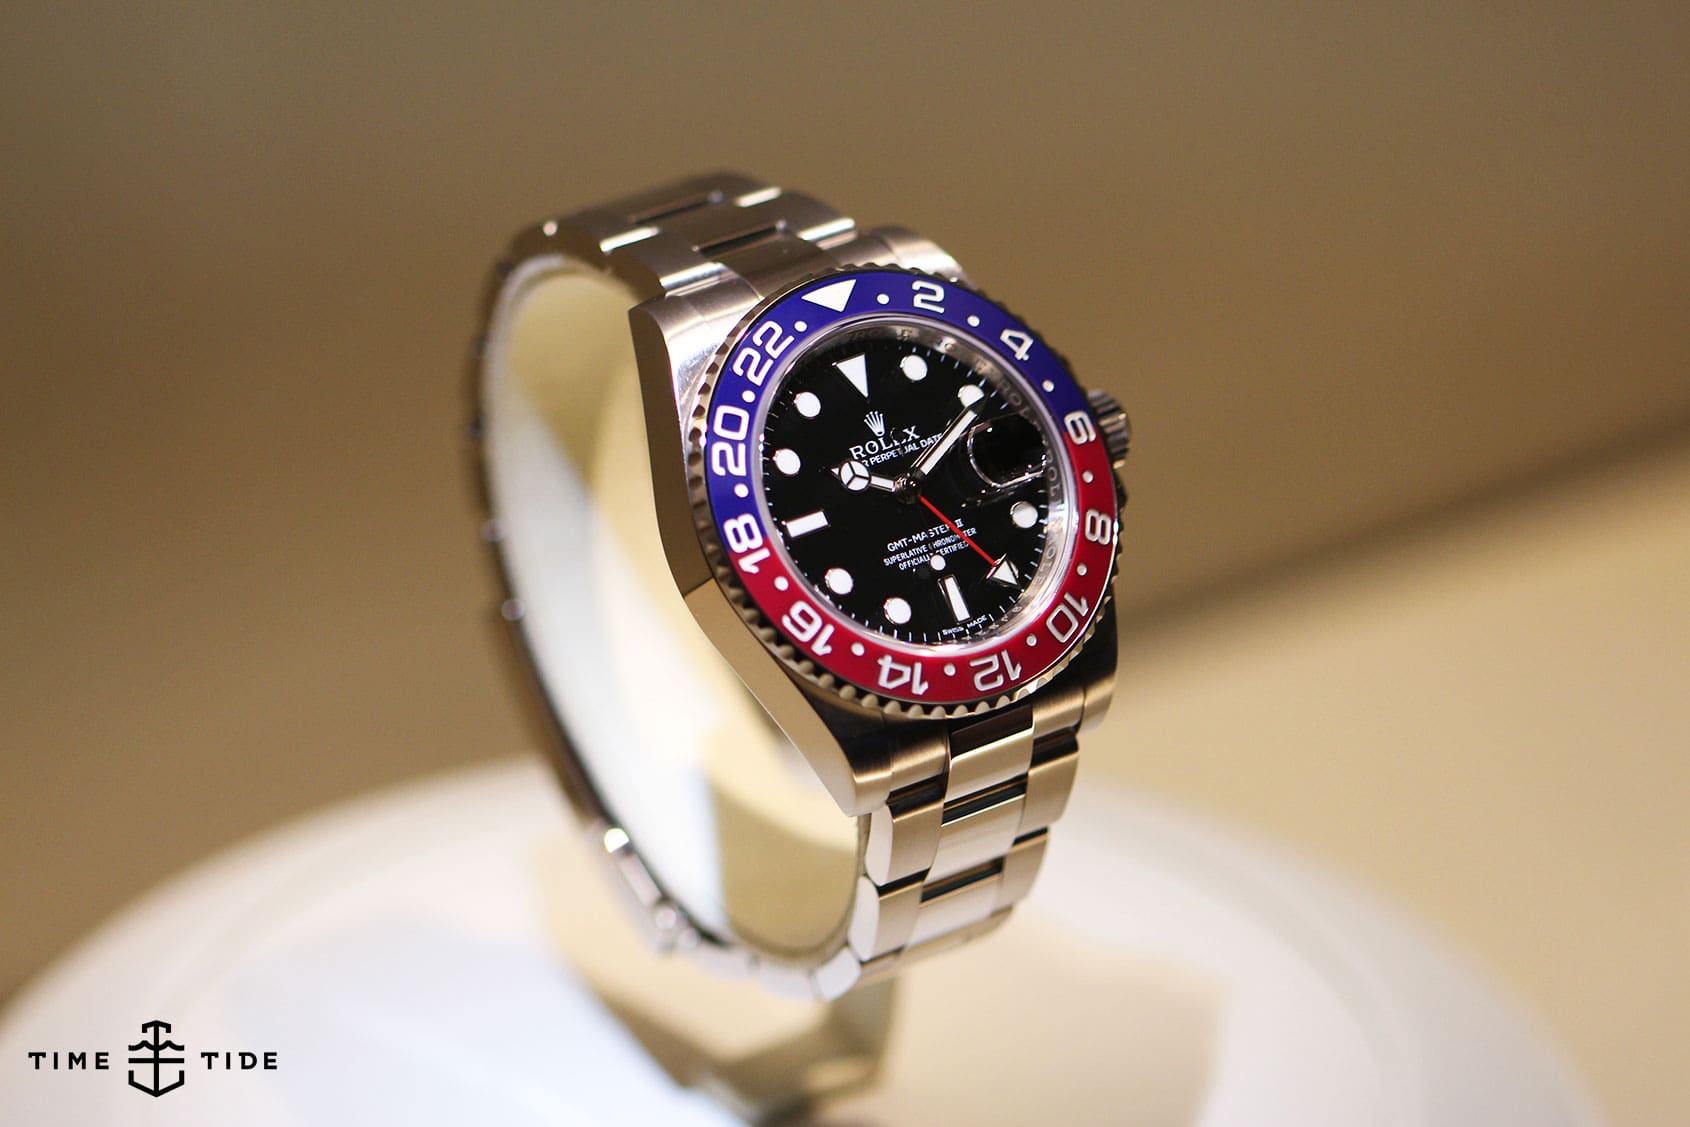 BASELWORLD 2014: Day 1 – First Impressions